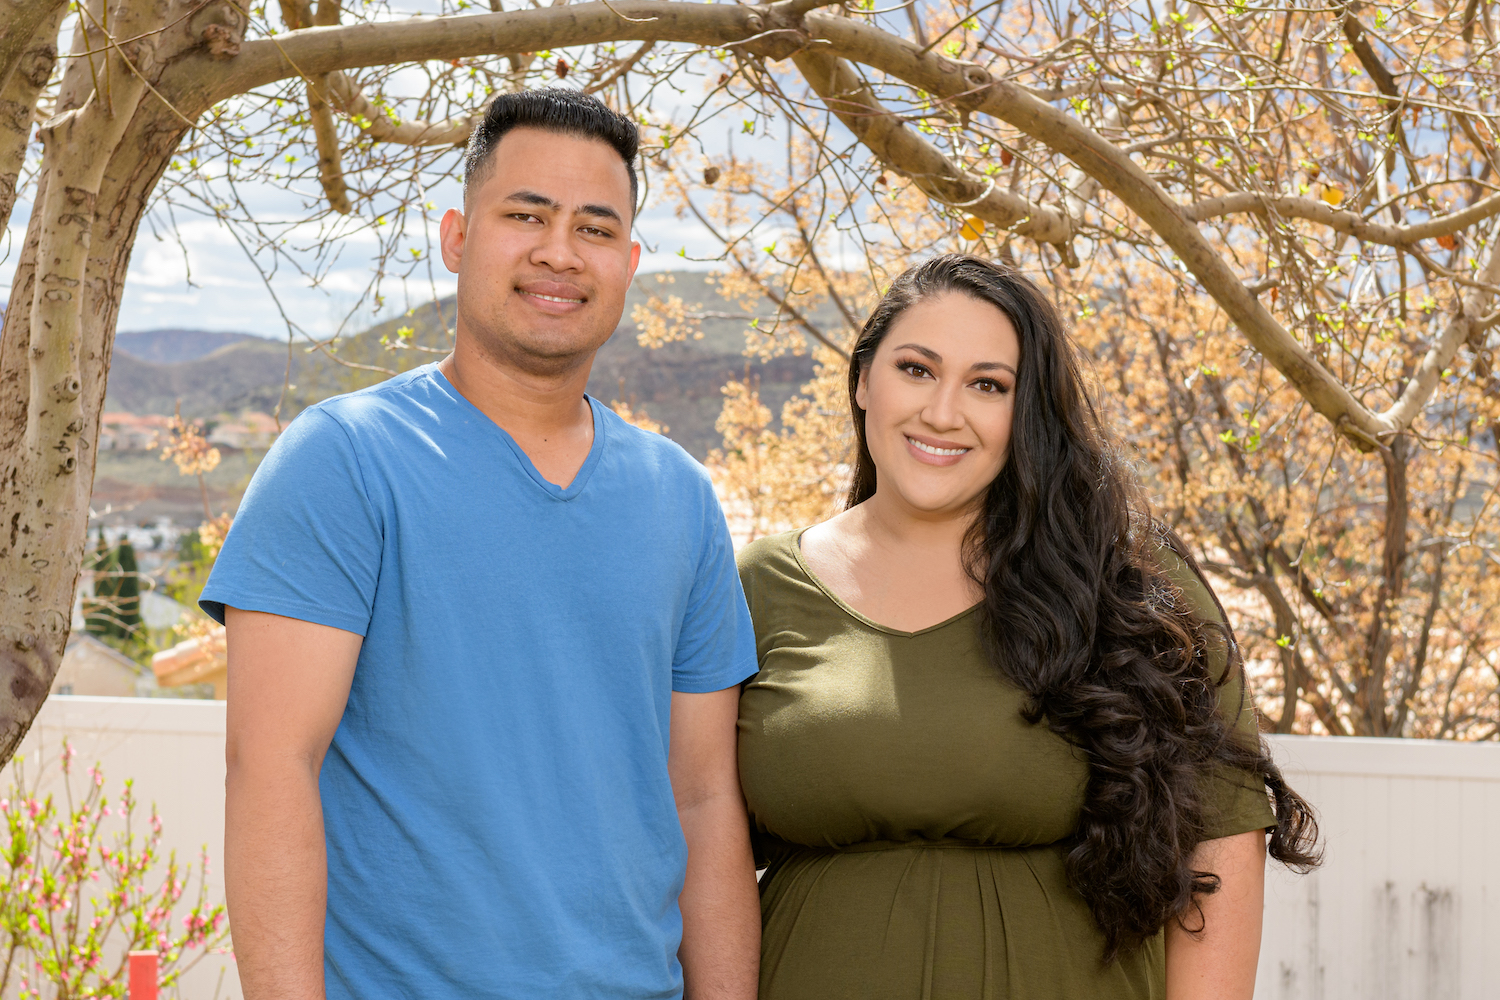 ’90 Day Fiancé Happily Ever After?’ Premiere The Fighting’s Already